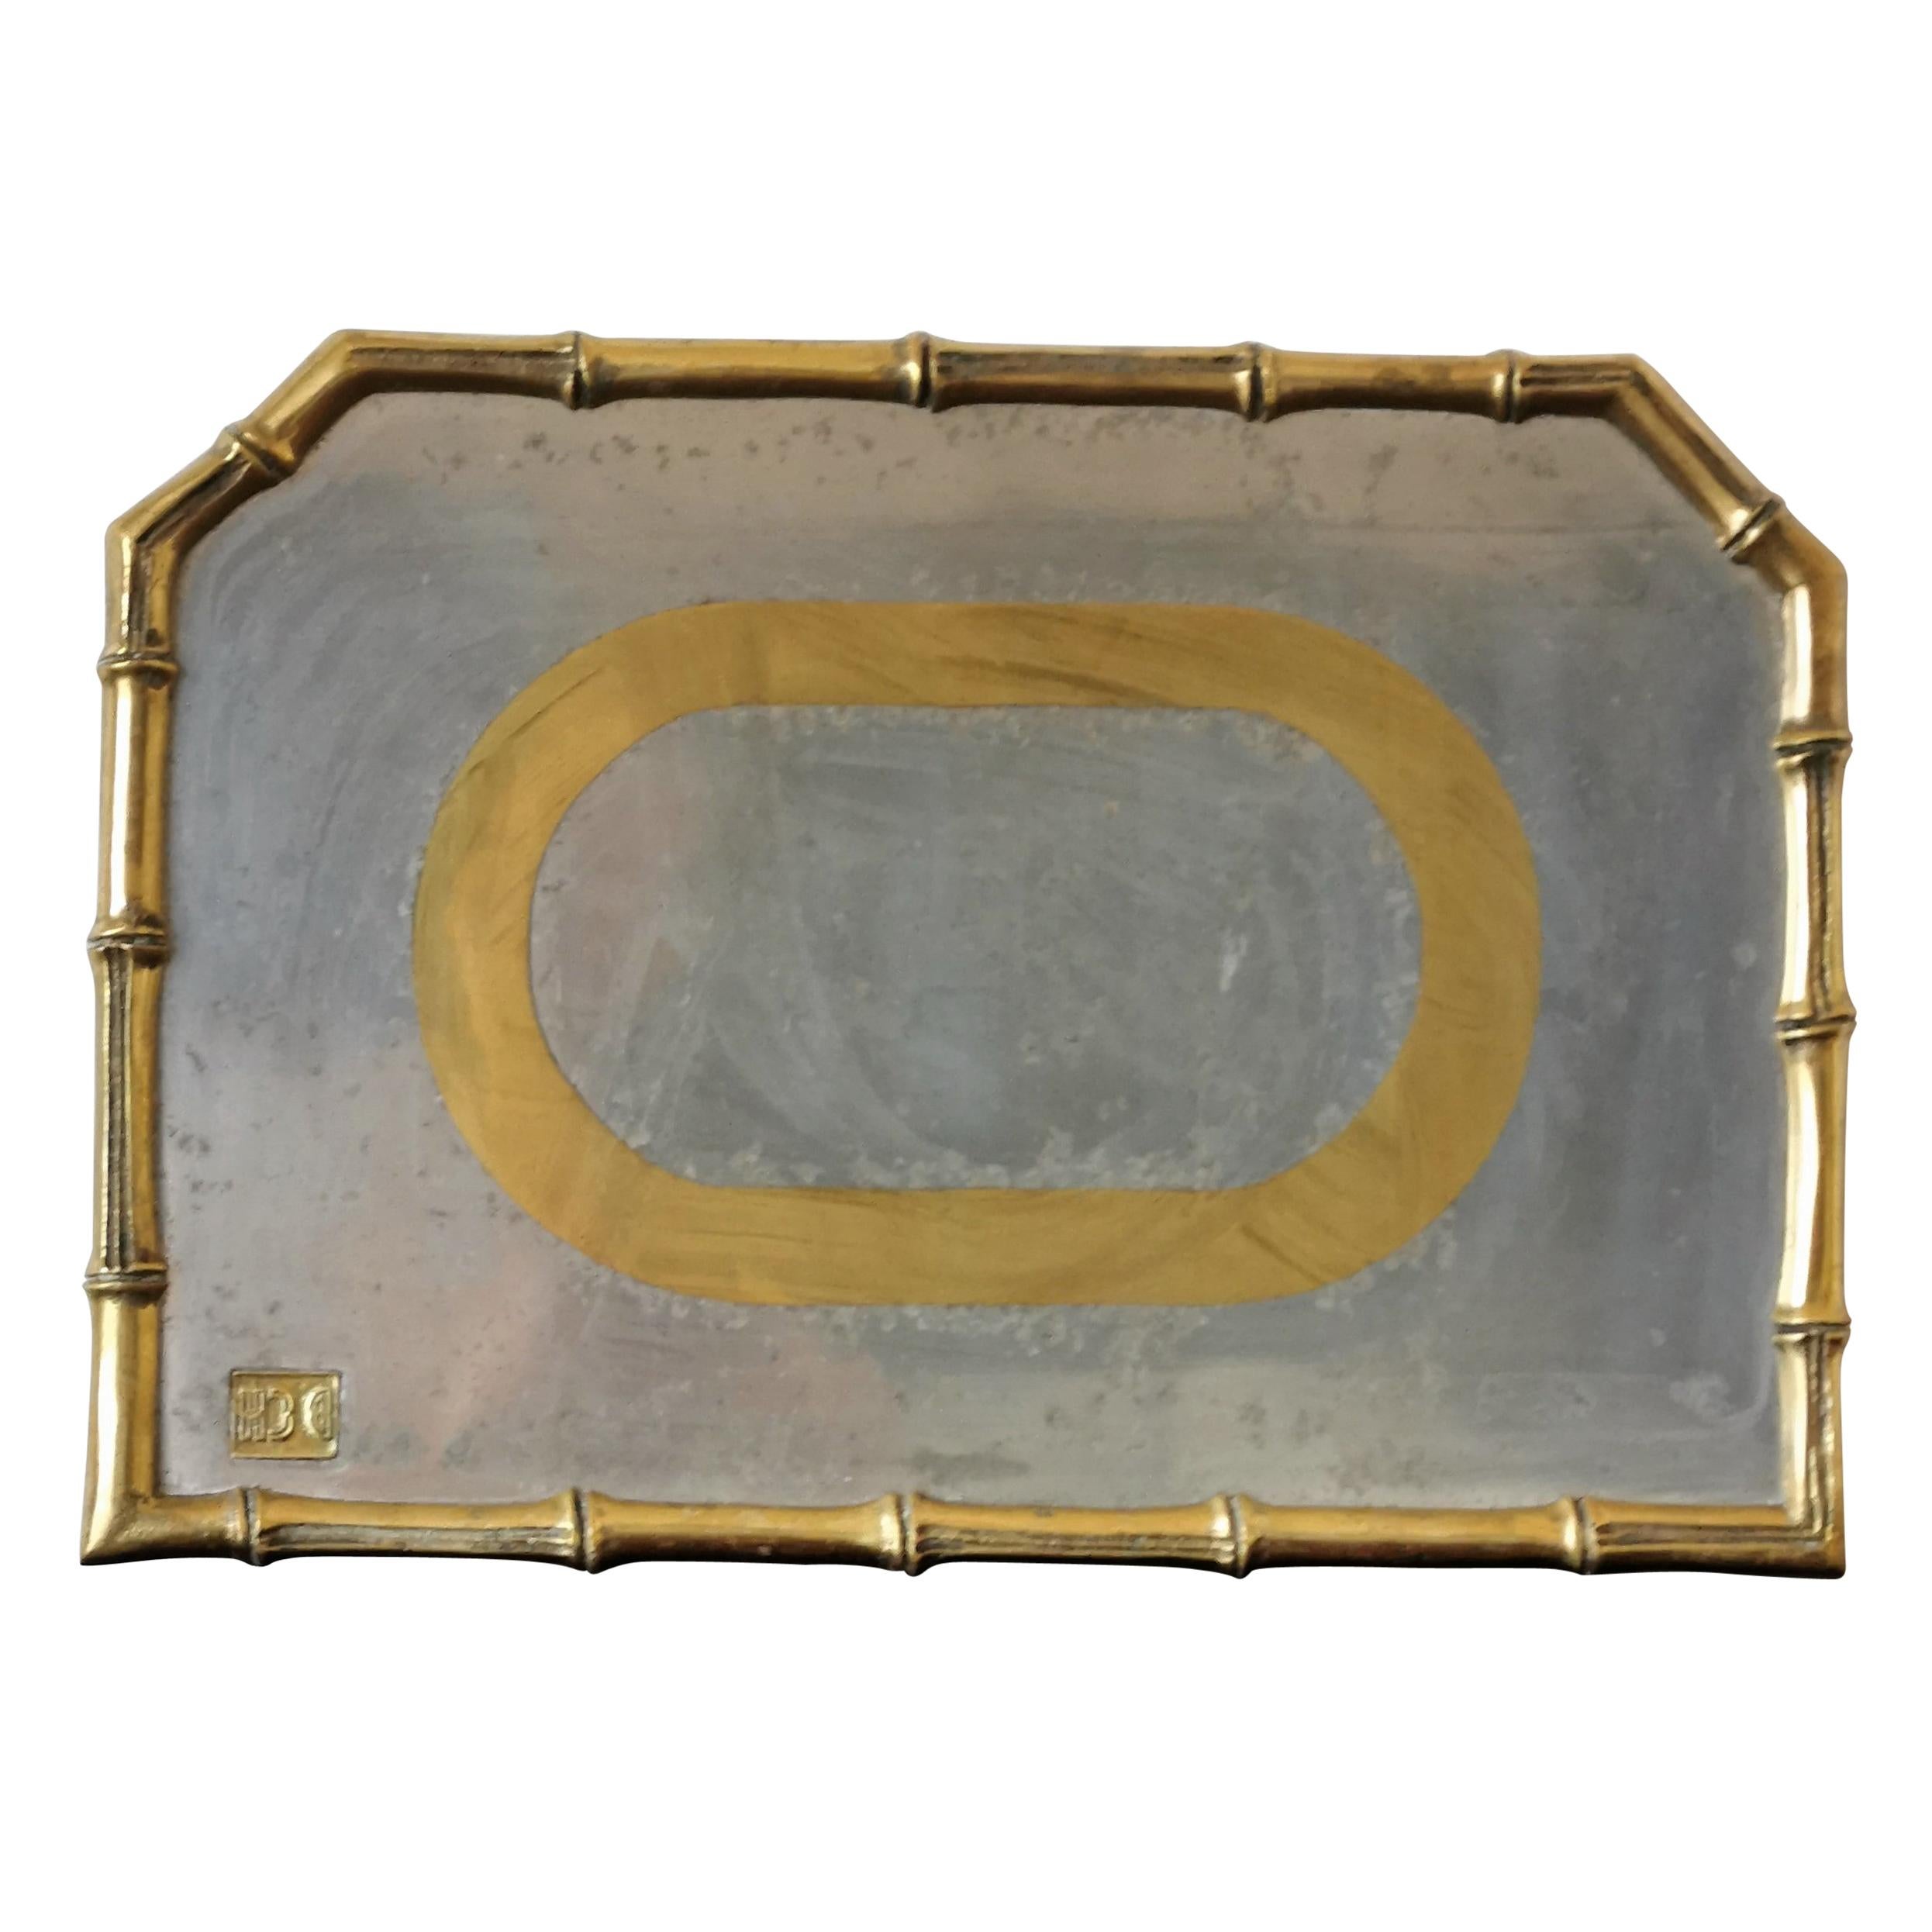 Rare Cast Aluminum and Brass Brutalist Tray by David Marshall, Spain, 1970s